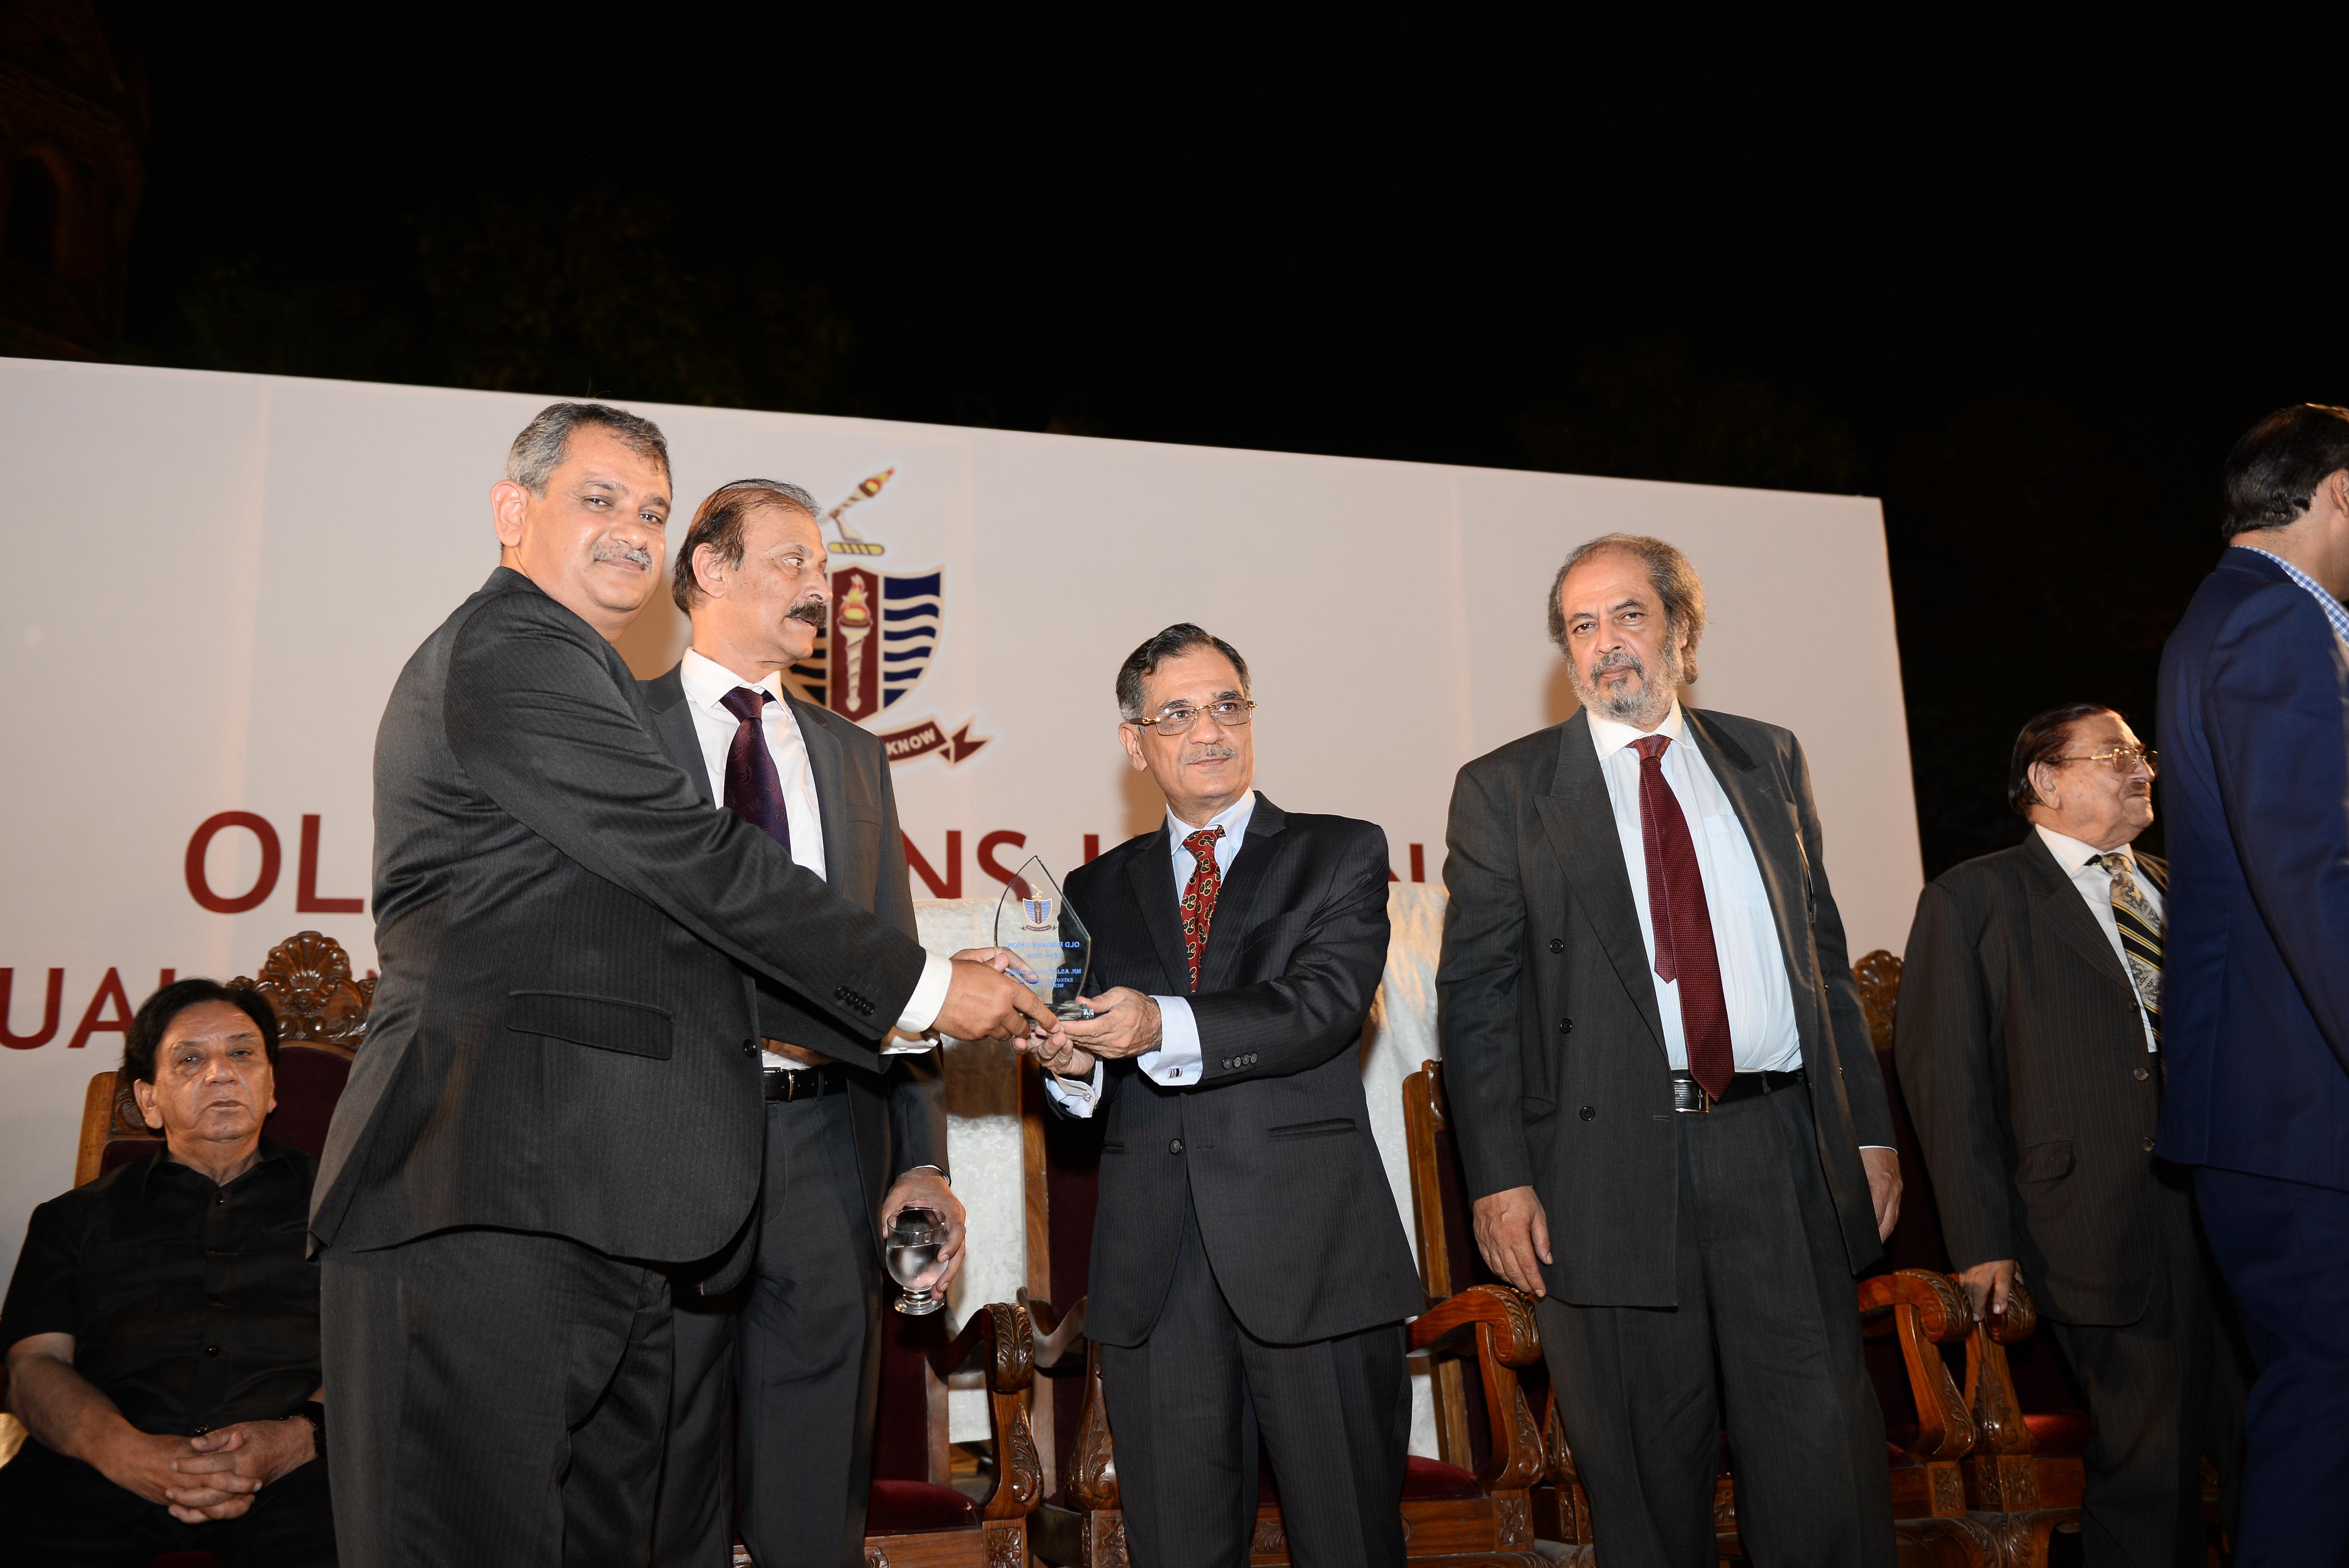 Mr. Asjad Ghani receiving his shield from the Chief Guest